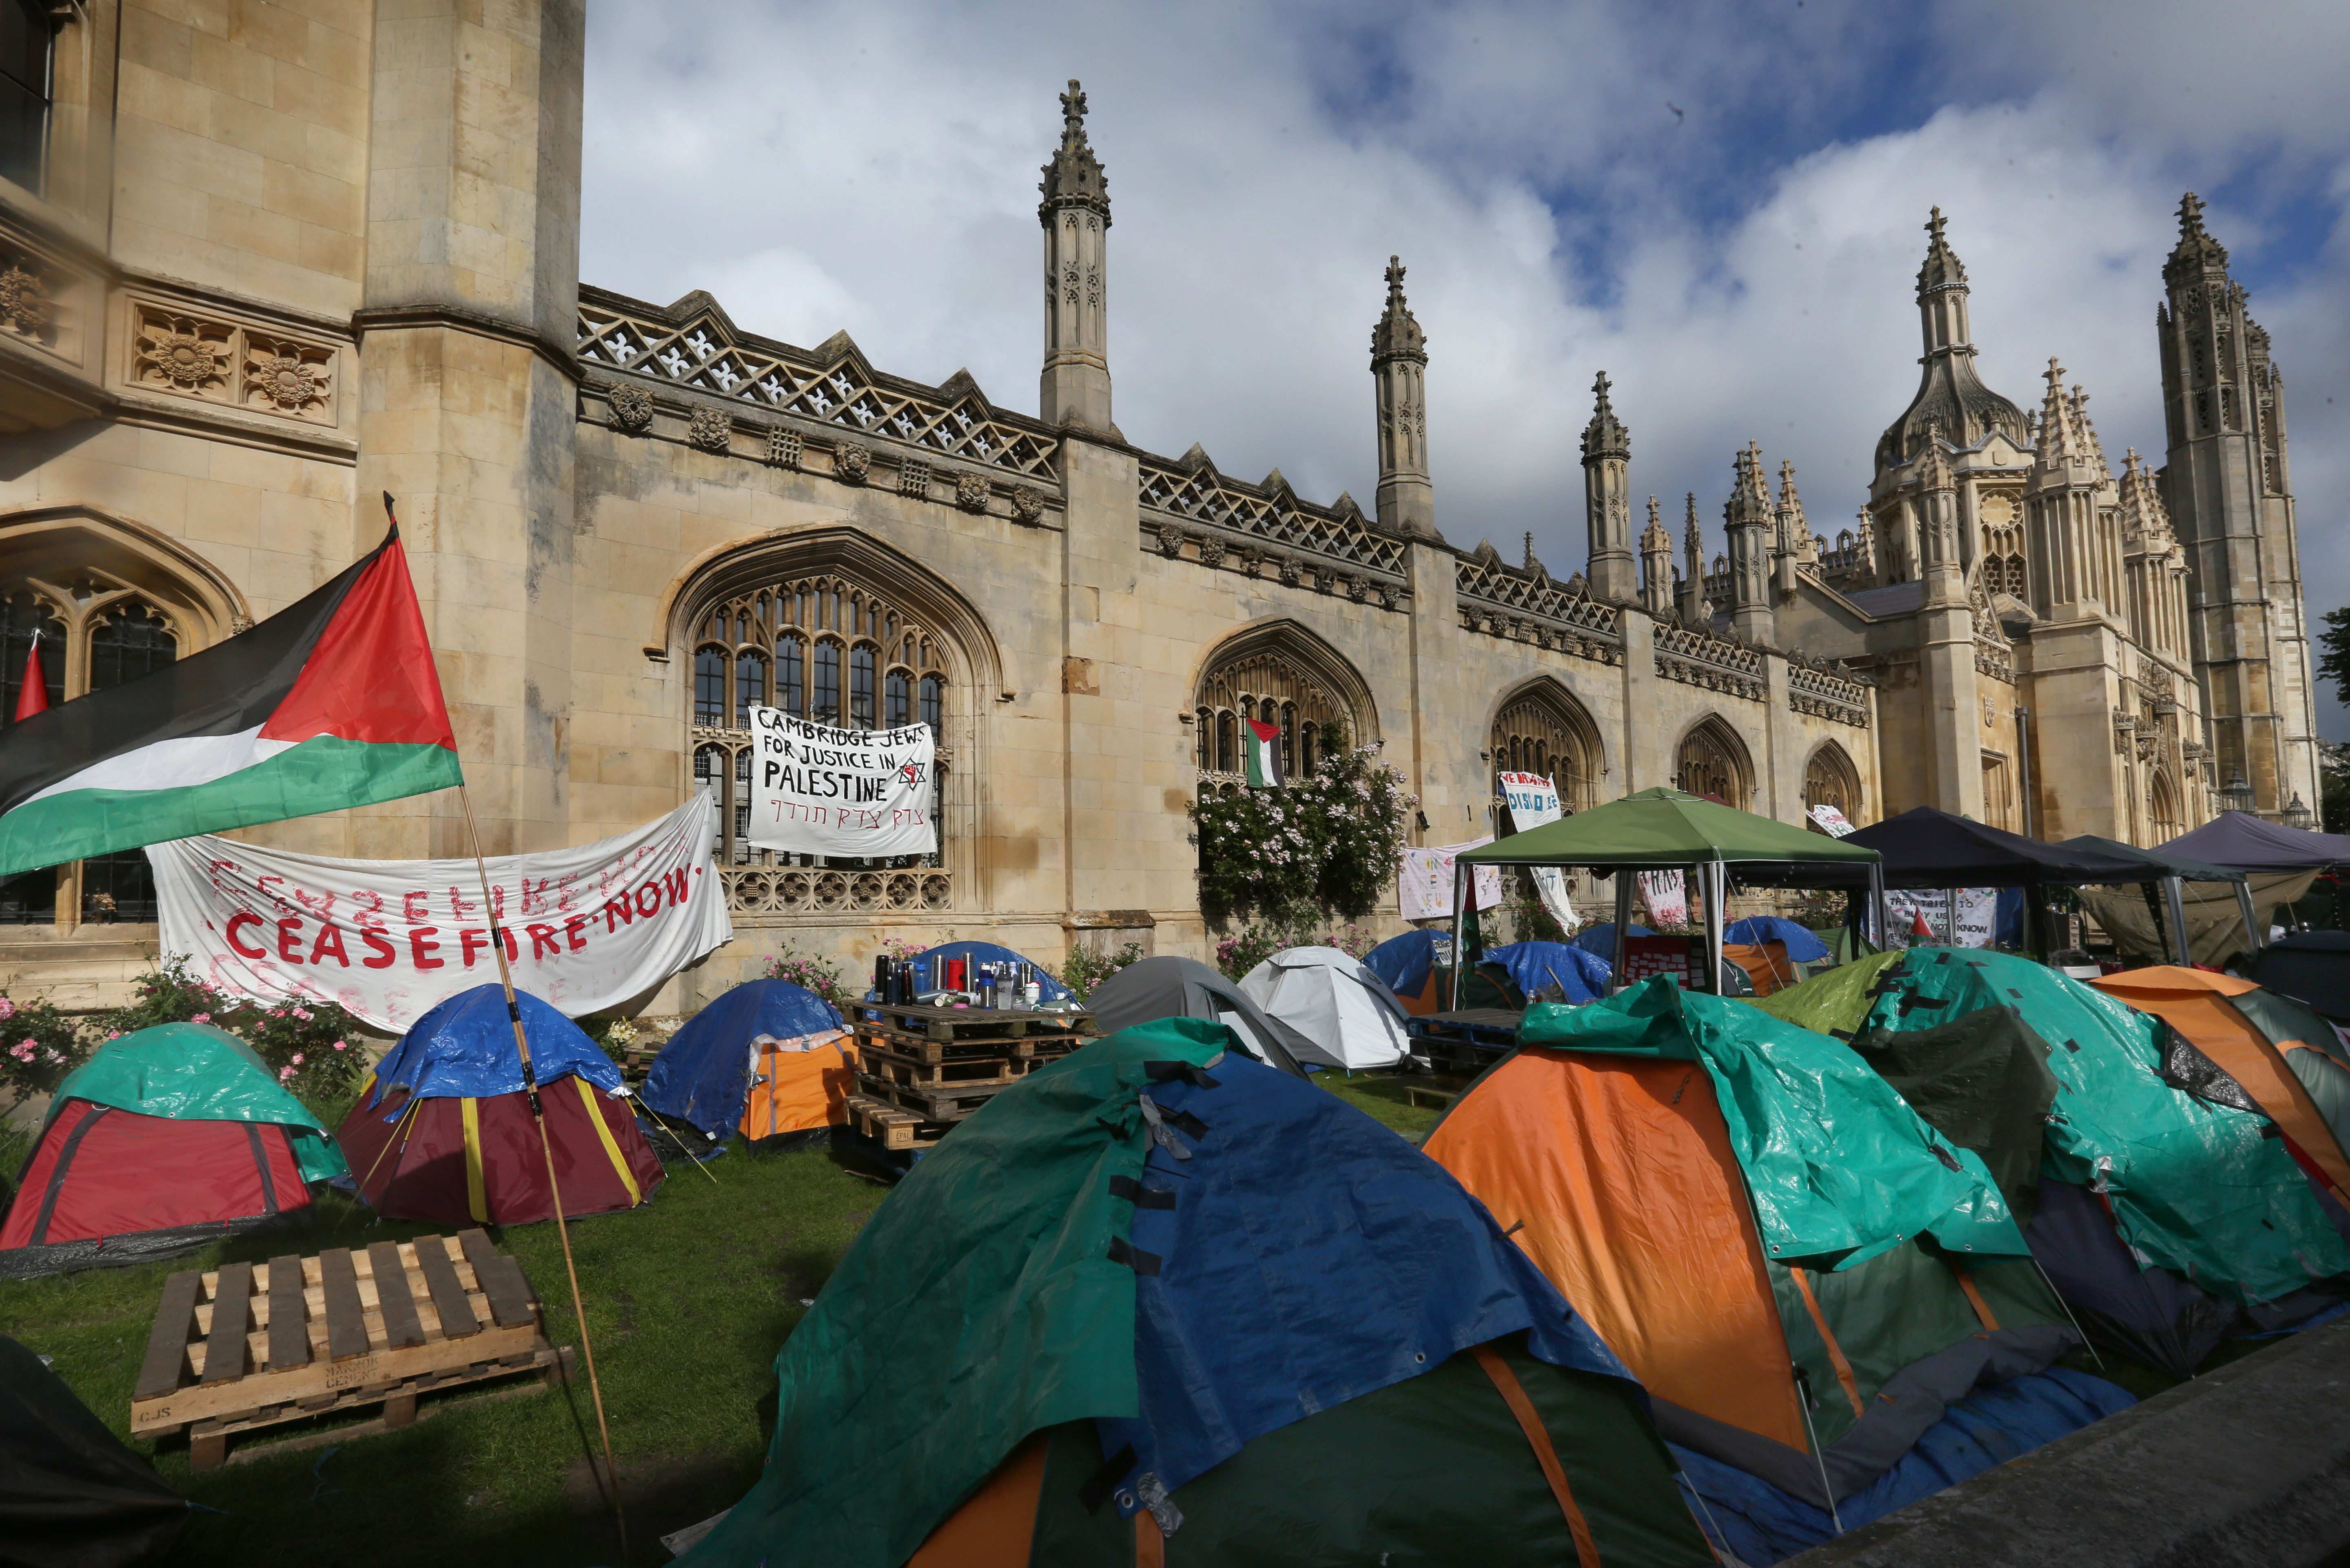 The photo shows a protest camp and placards outside Cambridge University